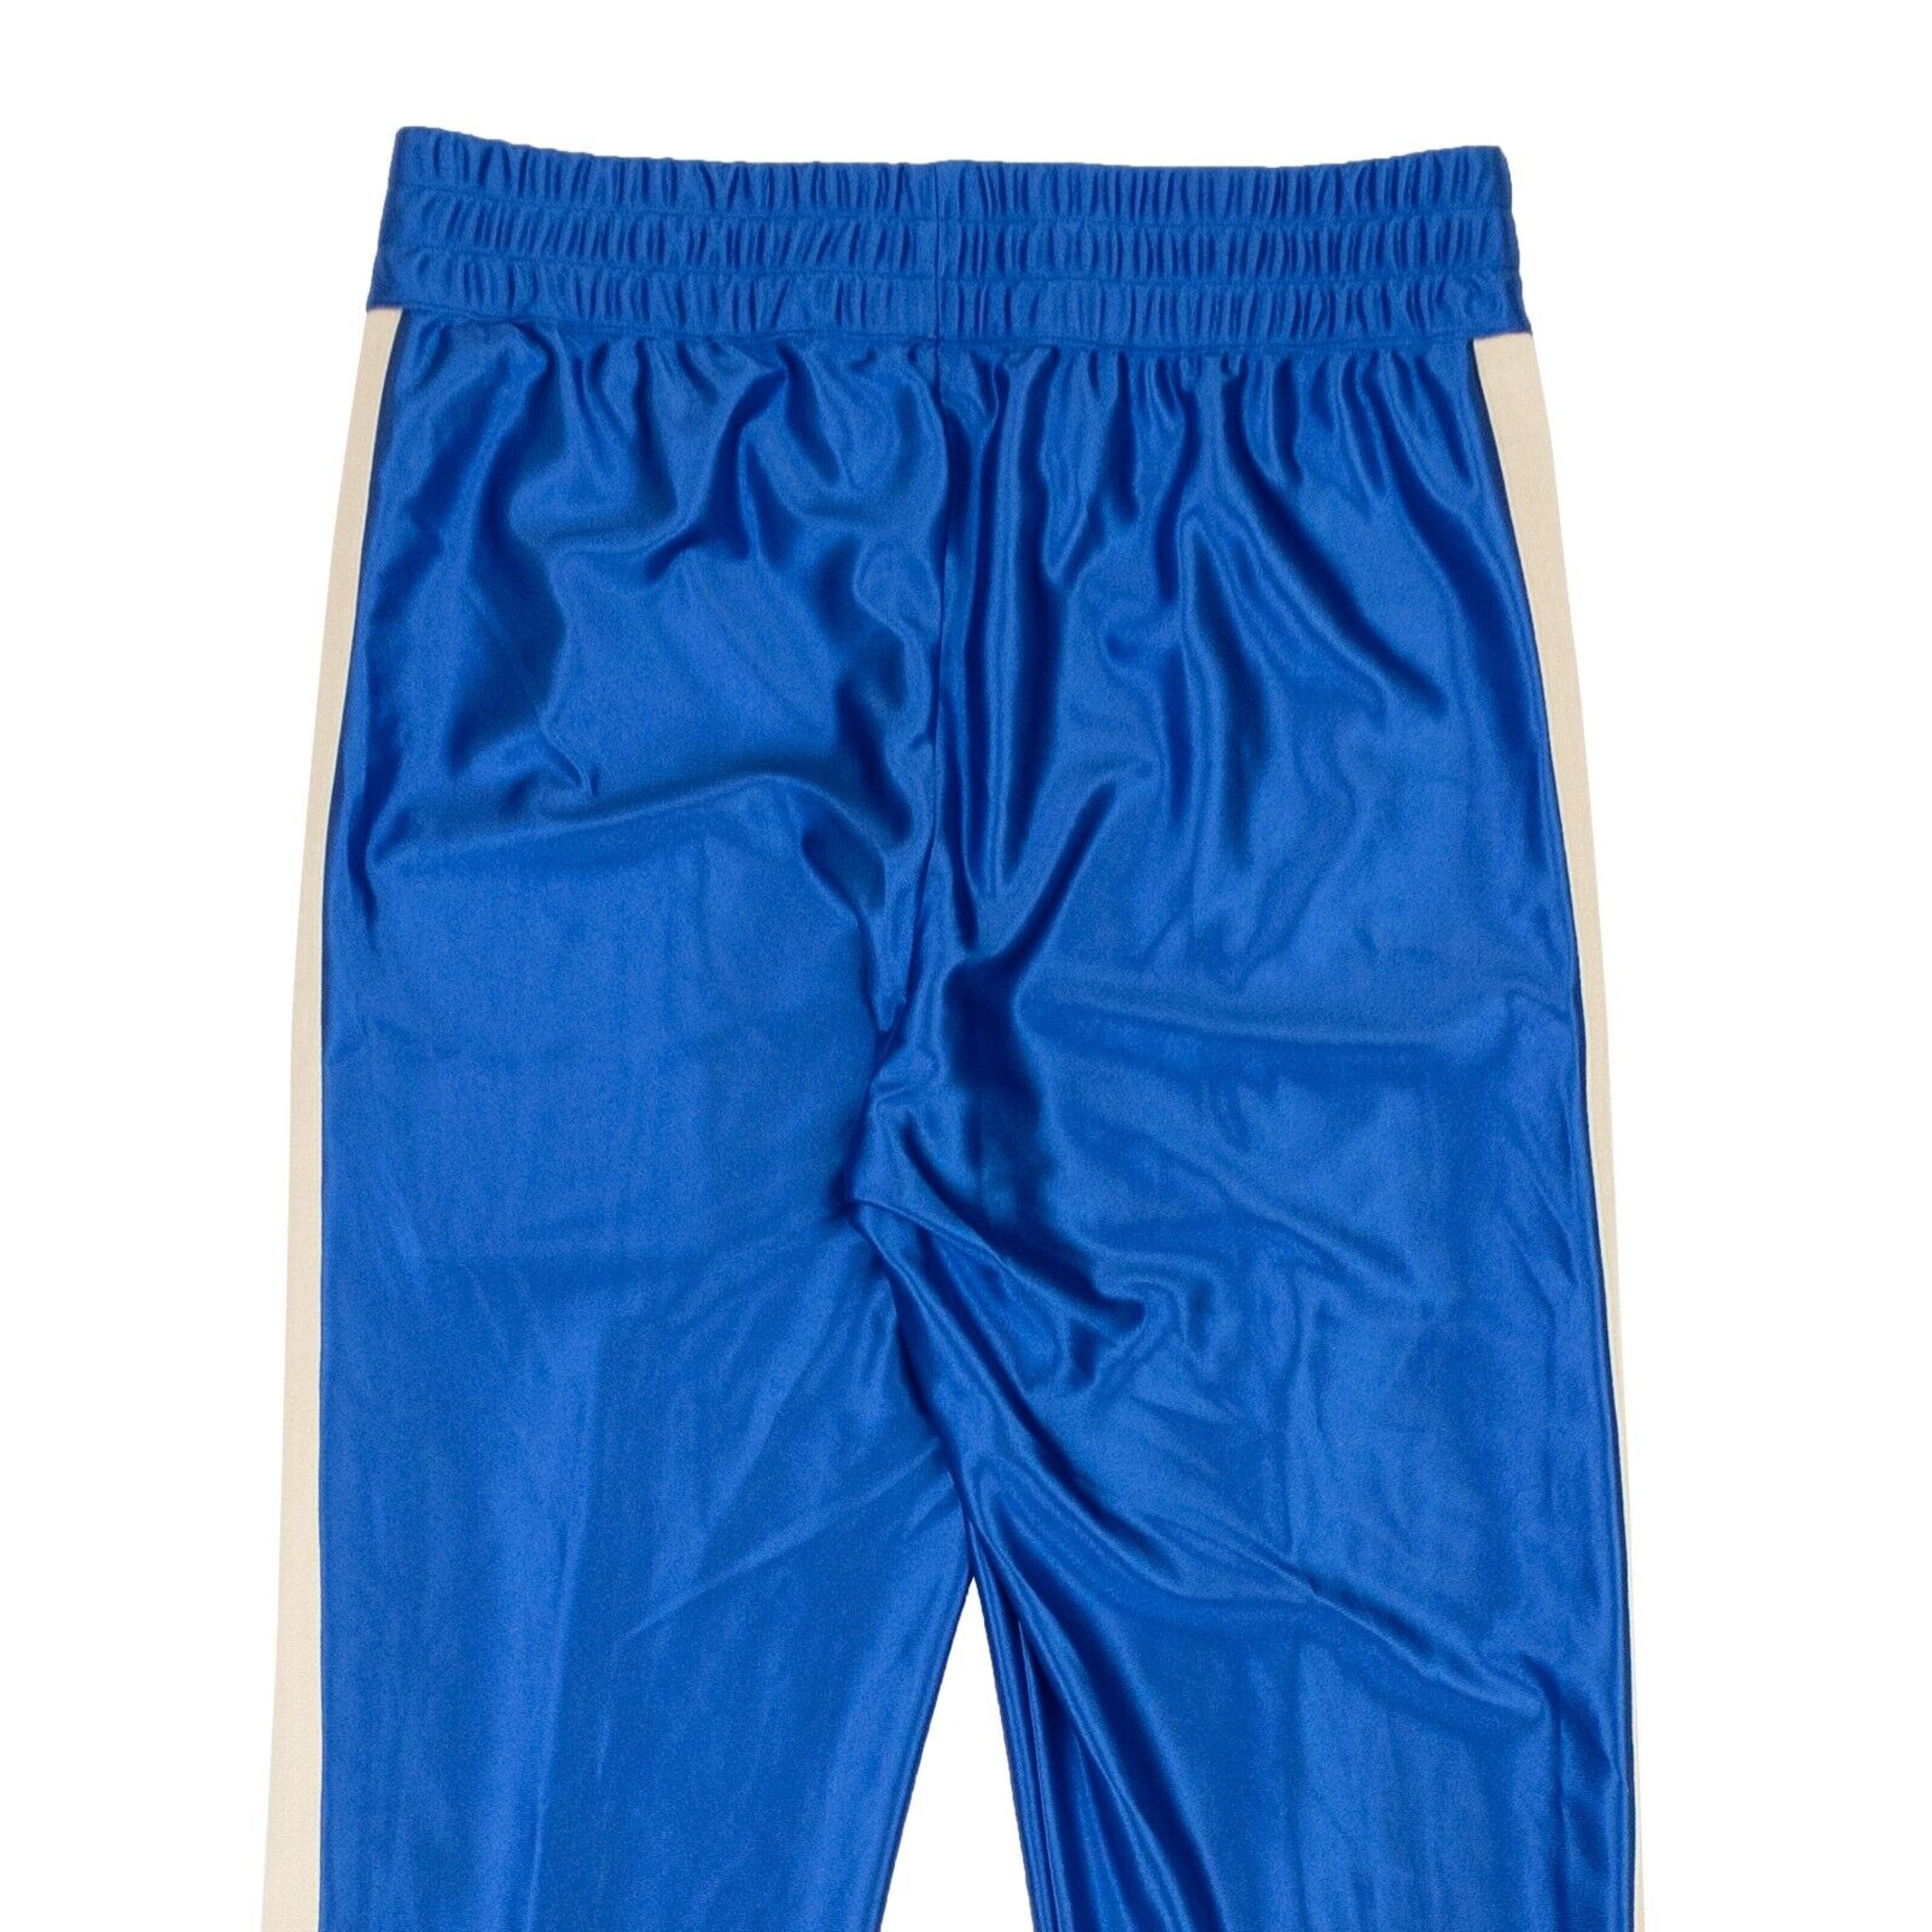 Alternate View 3 of Blue Polyester Track Pants